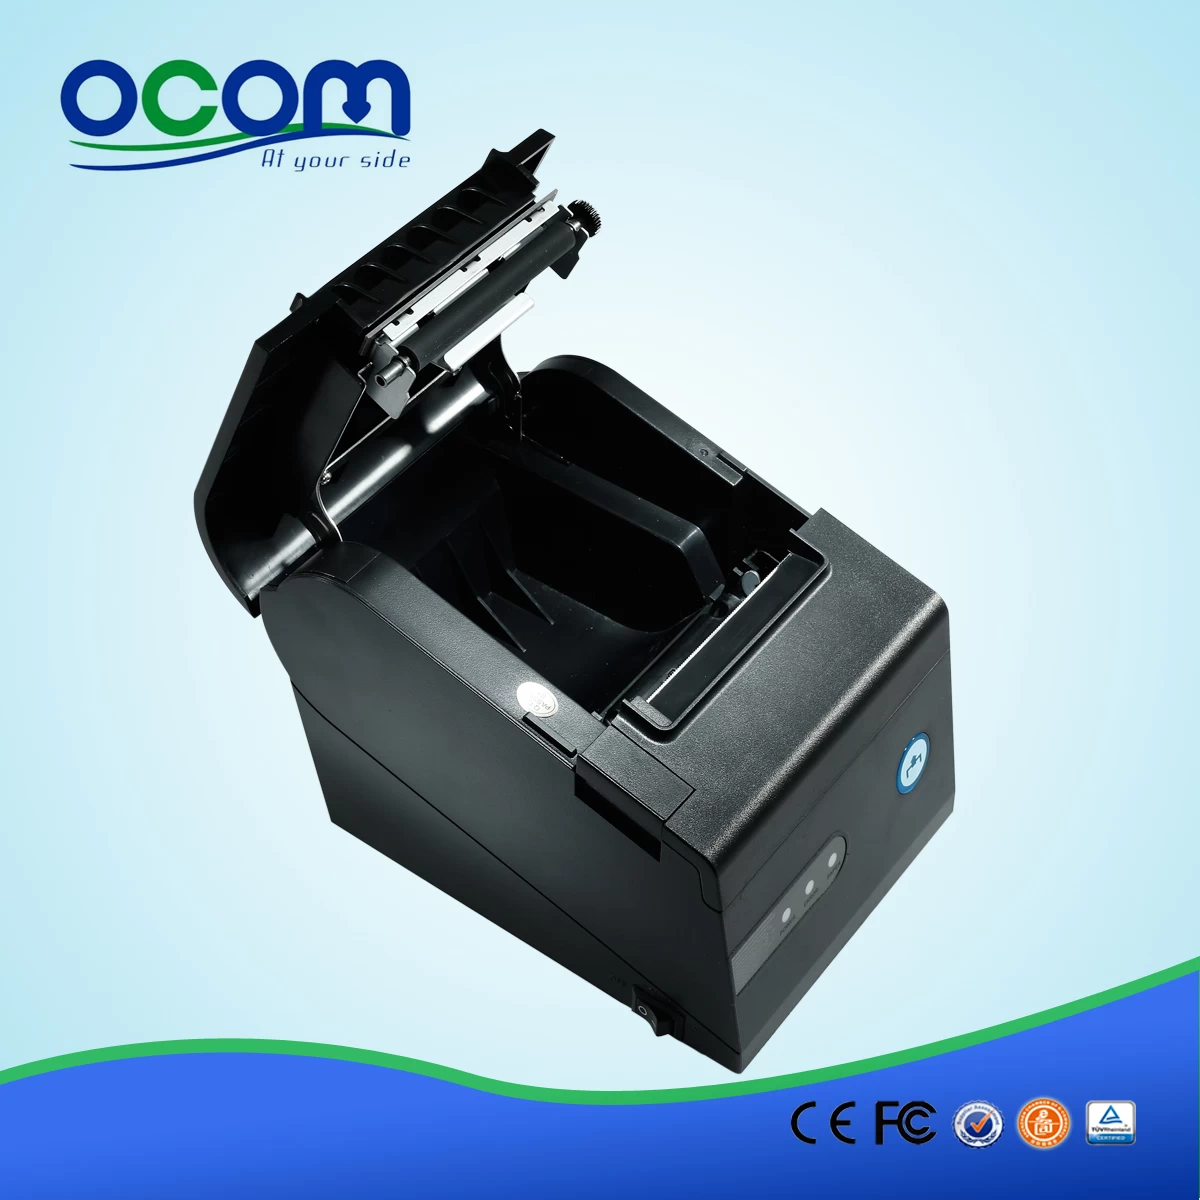 (OCPP-804) 80mm Auto-cutter With High Speed USB Thermal Receipt Printer